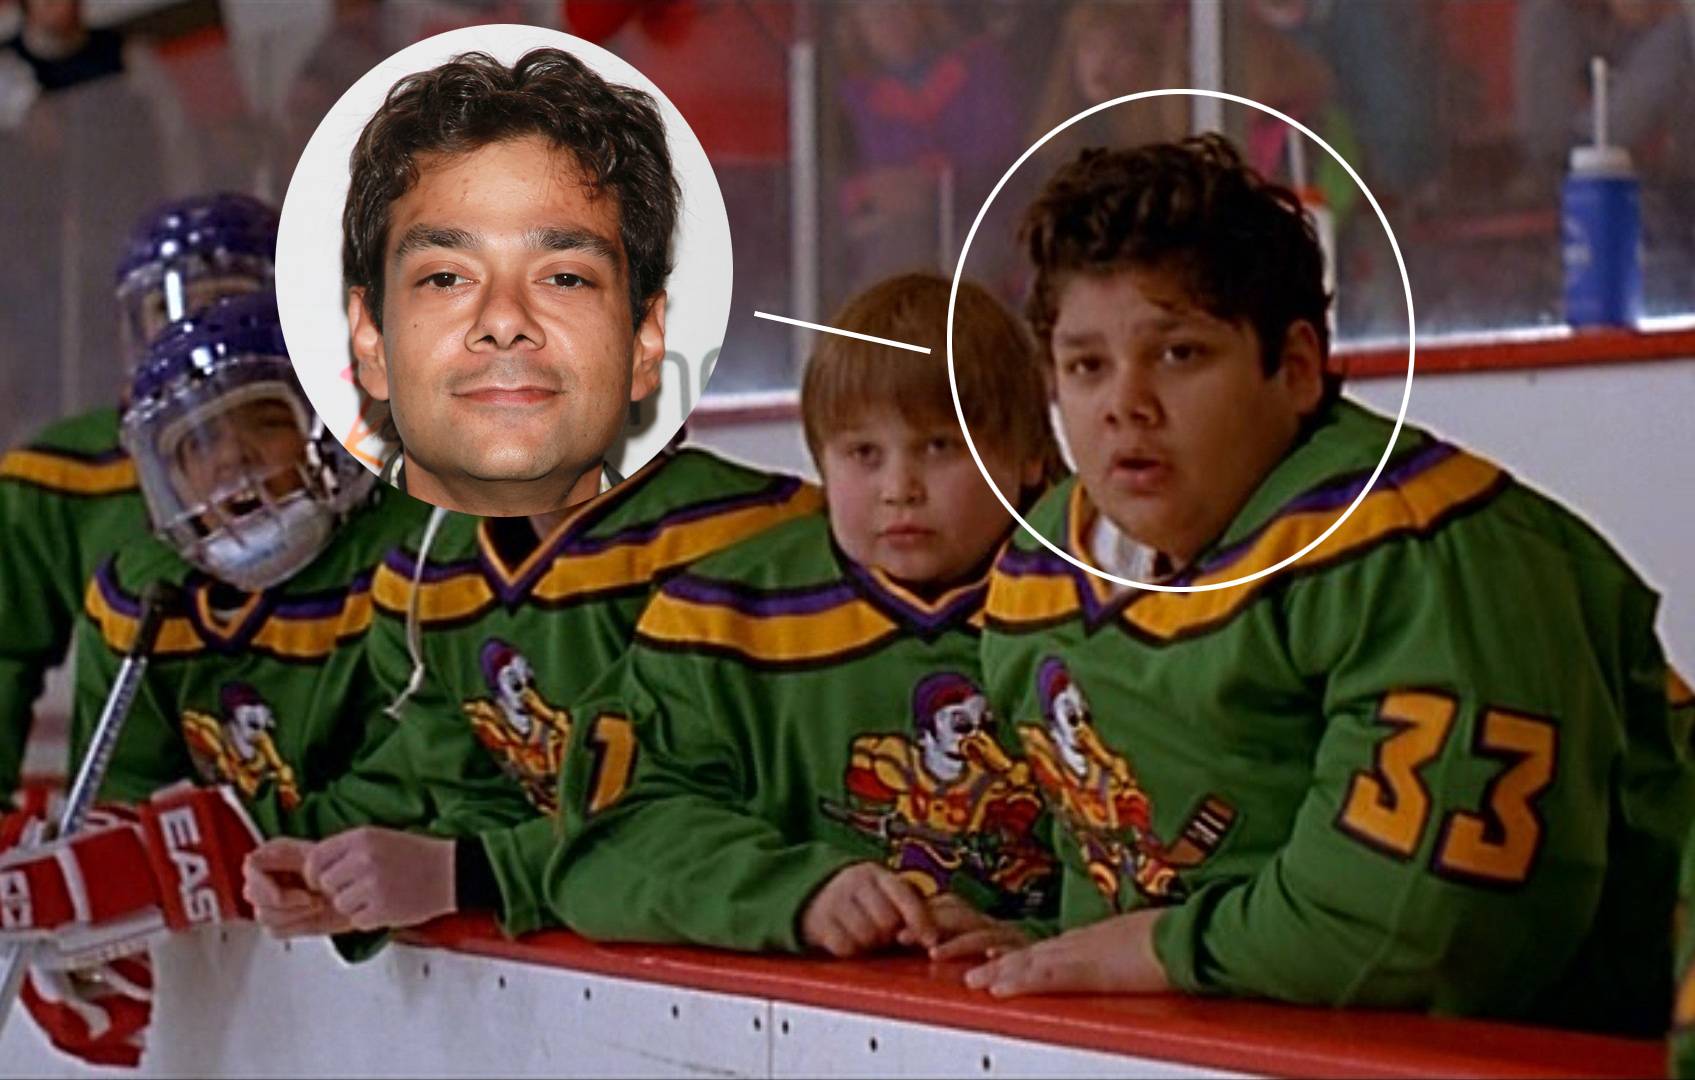 Goldberg From 'Mighty Ducks' Is Sort Of An Asshole | The Blemish